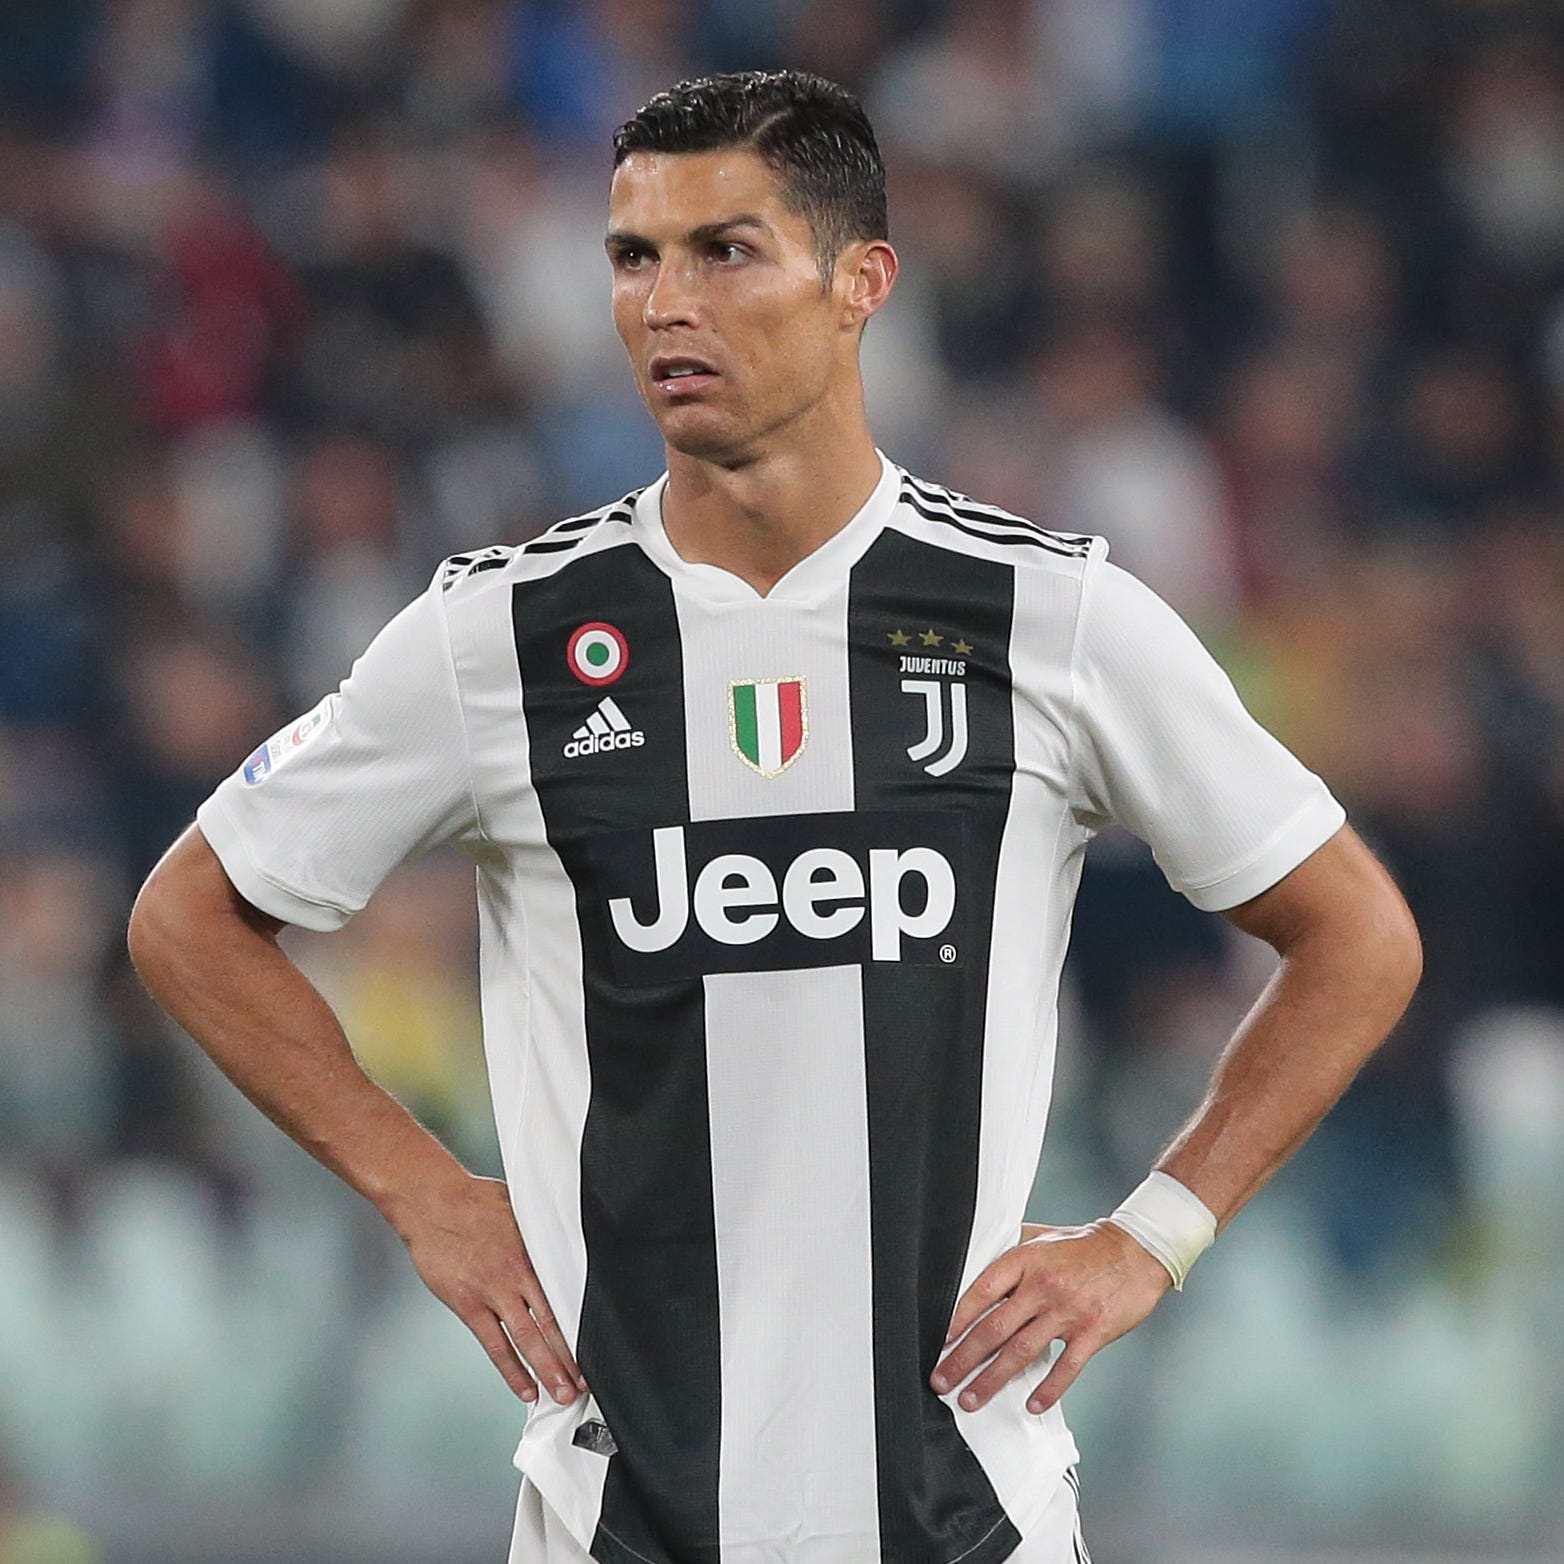 A lawsuit against Cristiano Ronaldo has been filed in Clark County, Nevada.